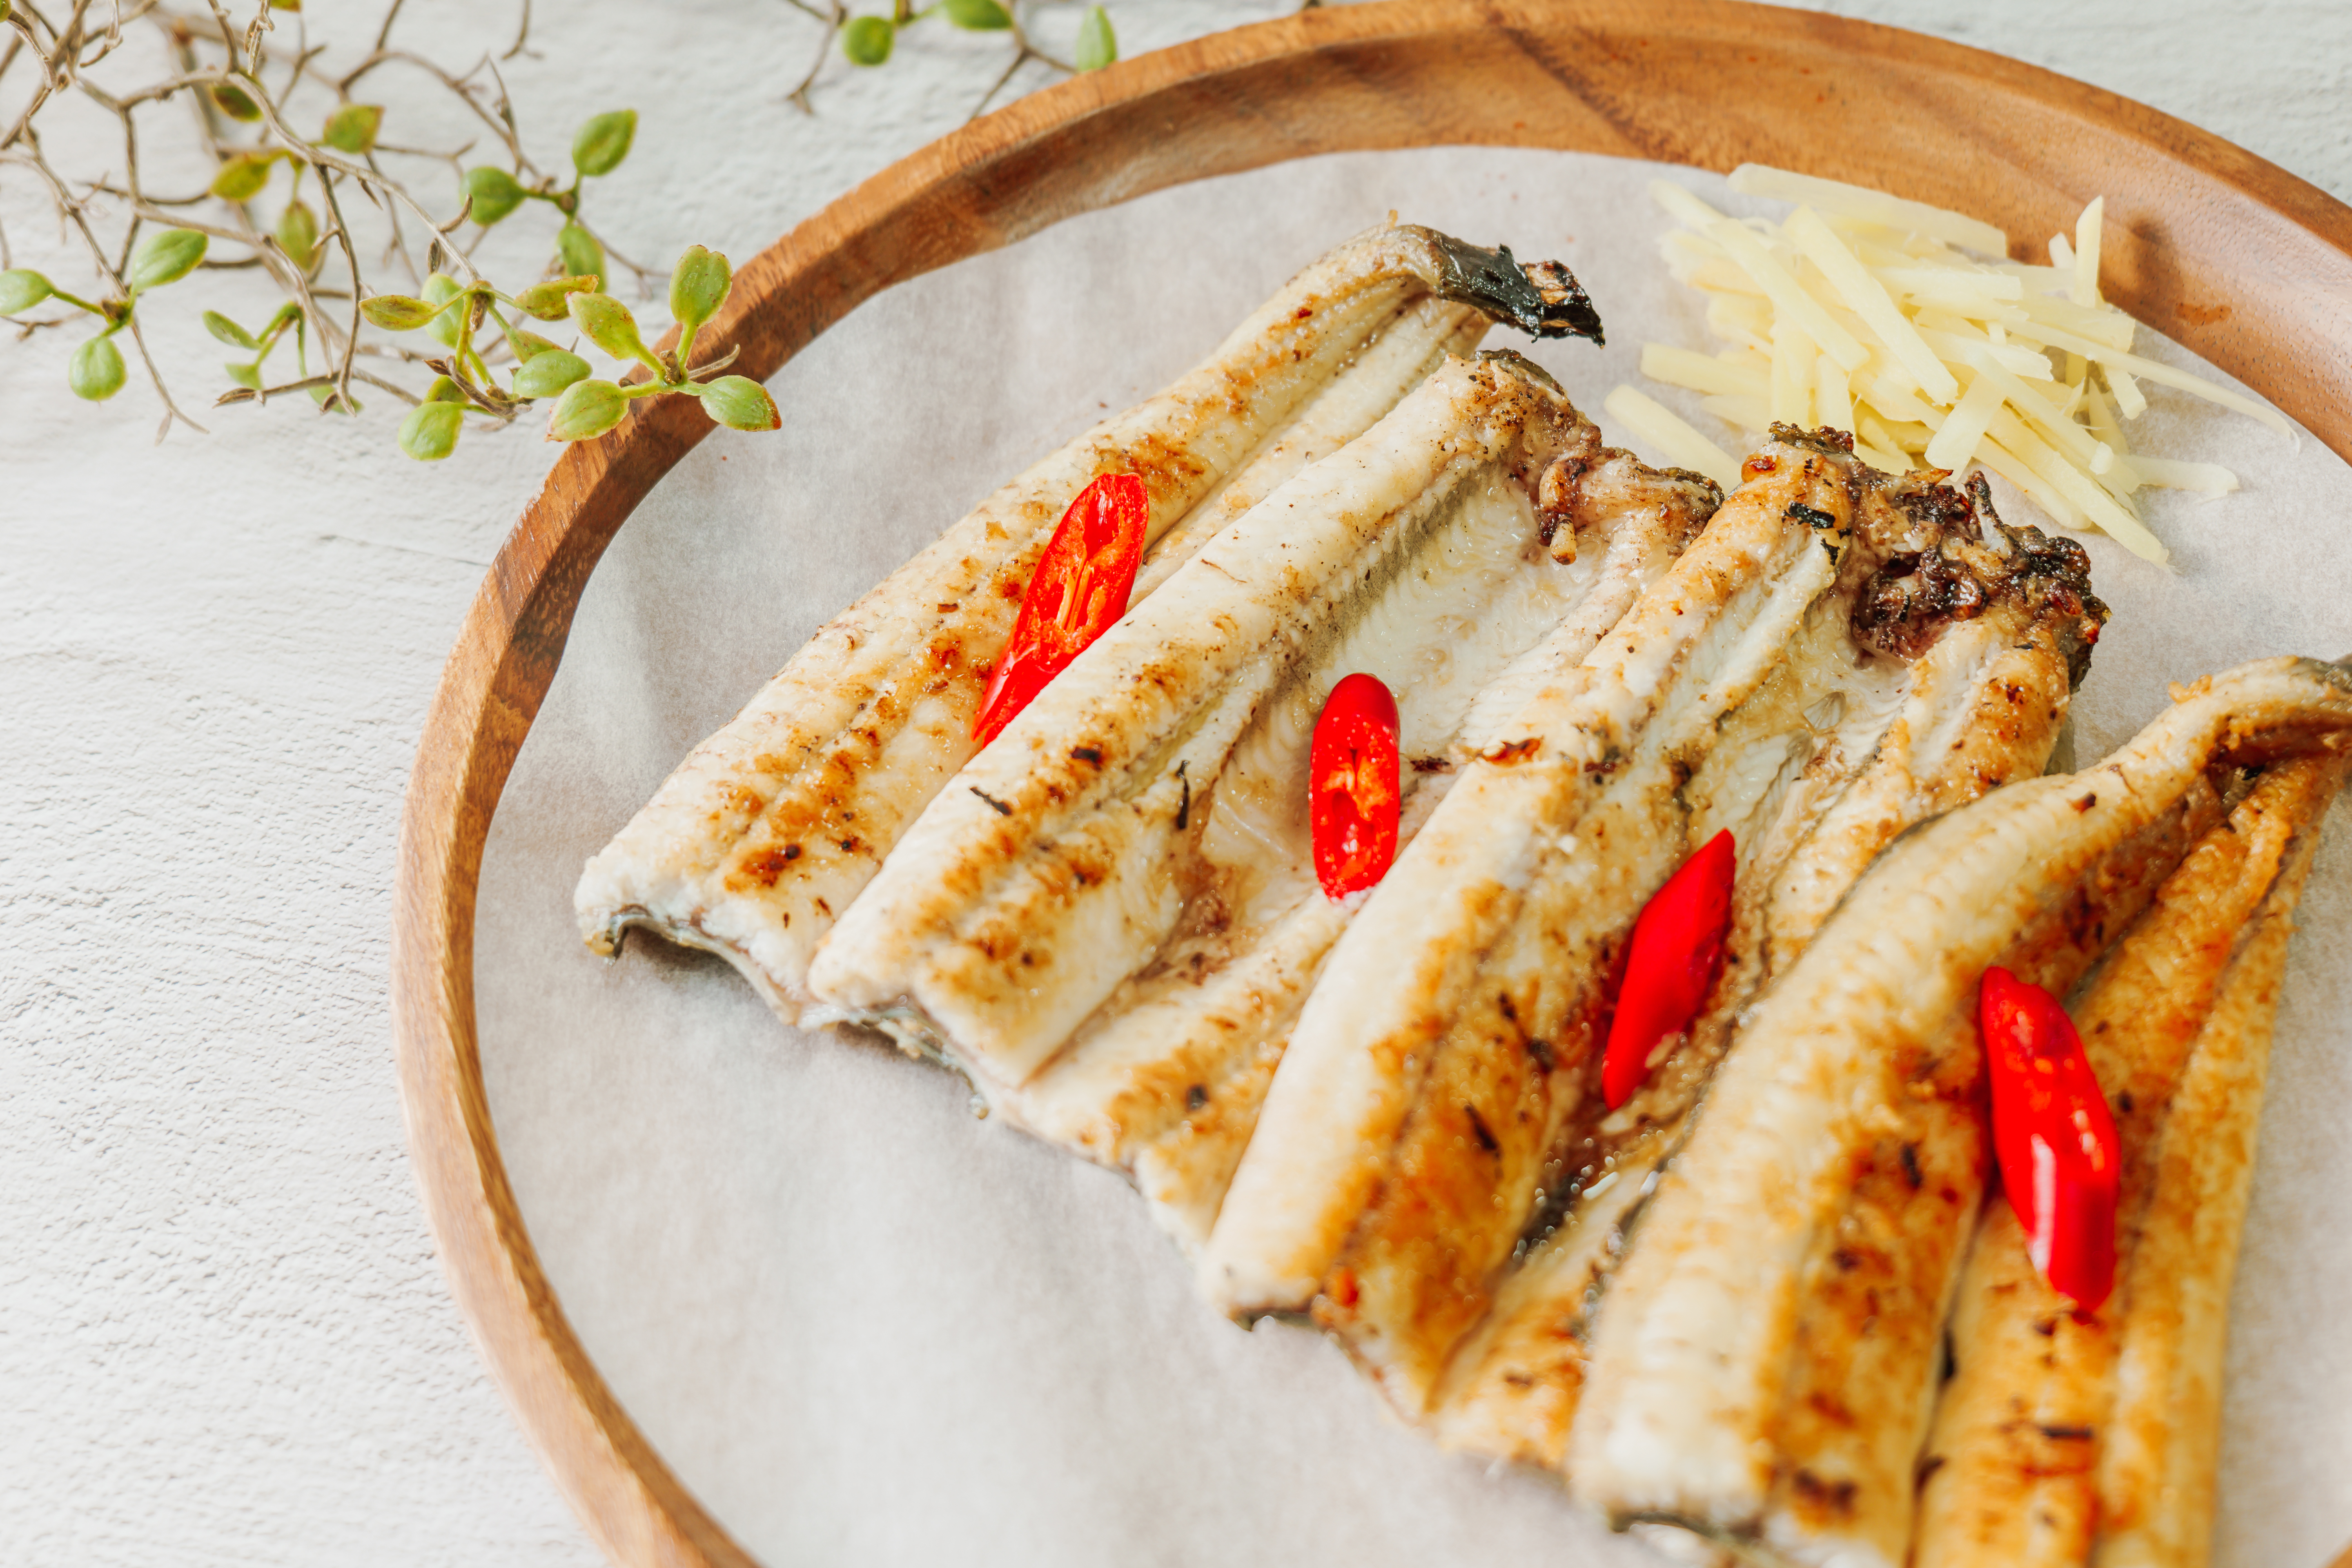 jangeogui, Cleaned eel are seasoned with salt, soy sauce, gochujang, and others to taste, and then grilled. Eel is rich in vitamins A, B, and C, which fight aging and keep the skin healthy and youthful.